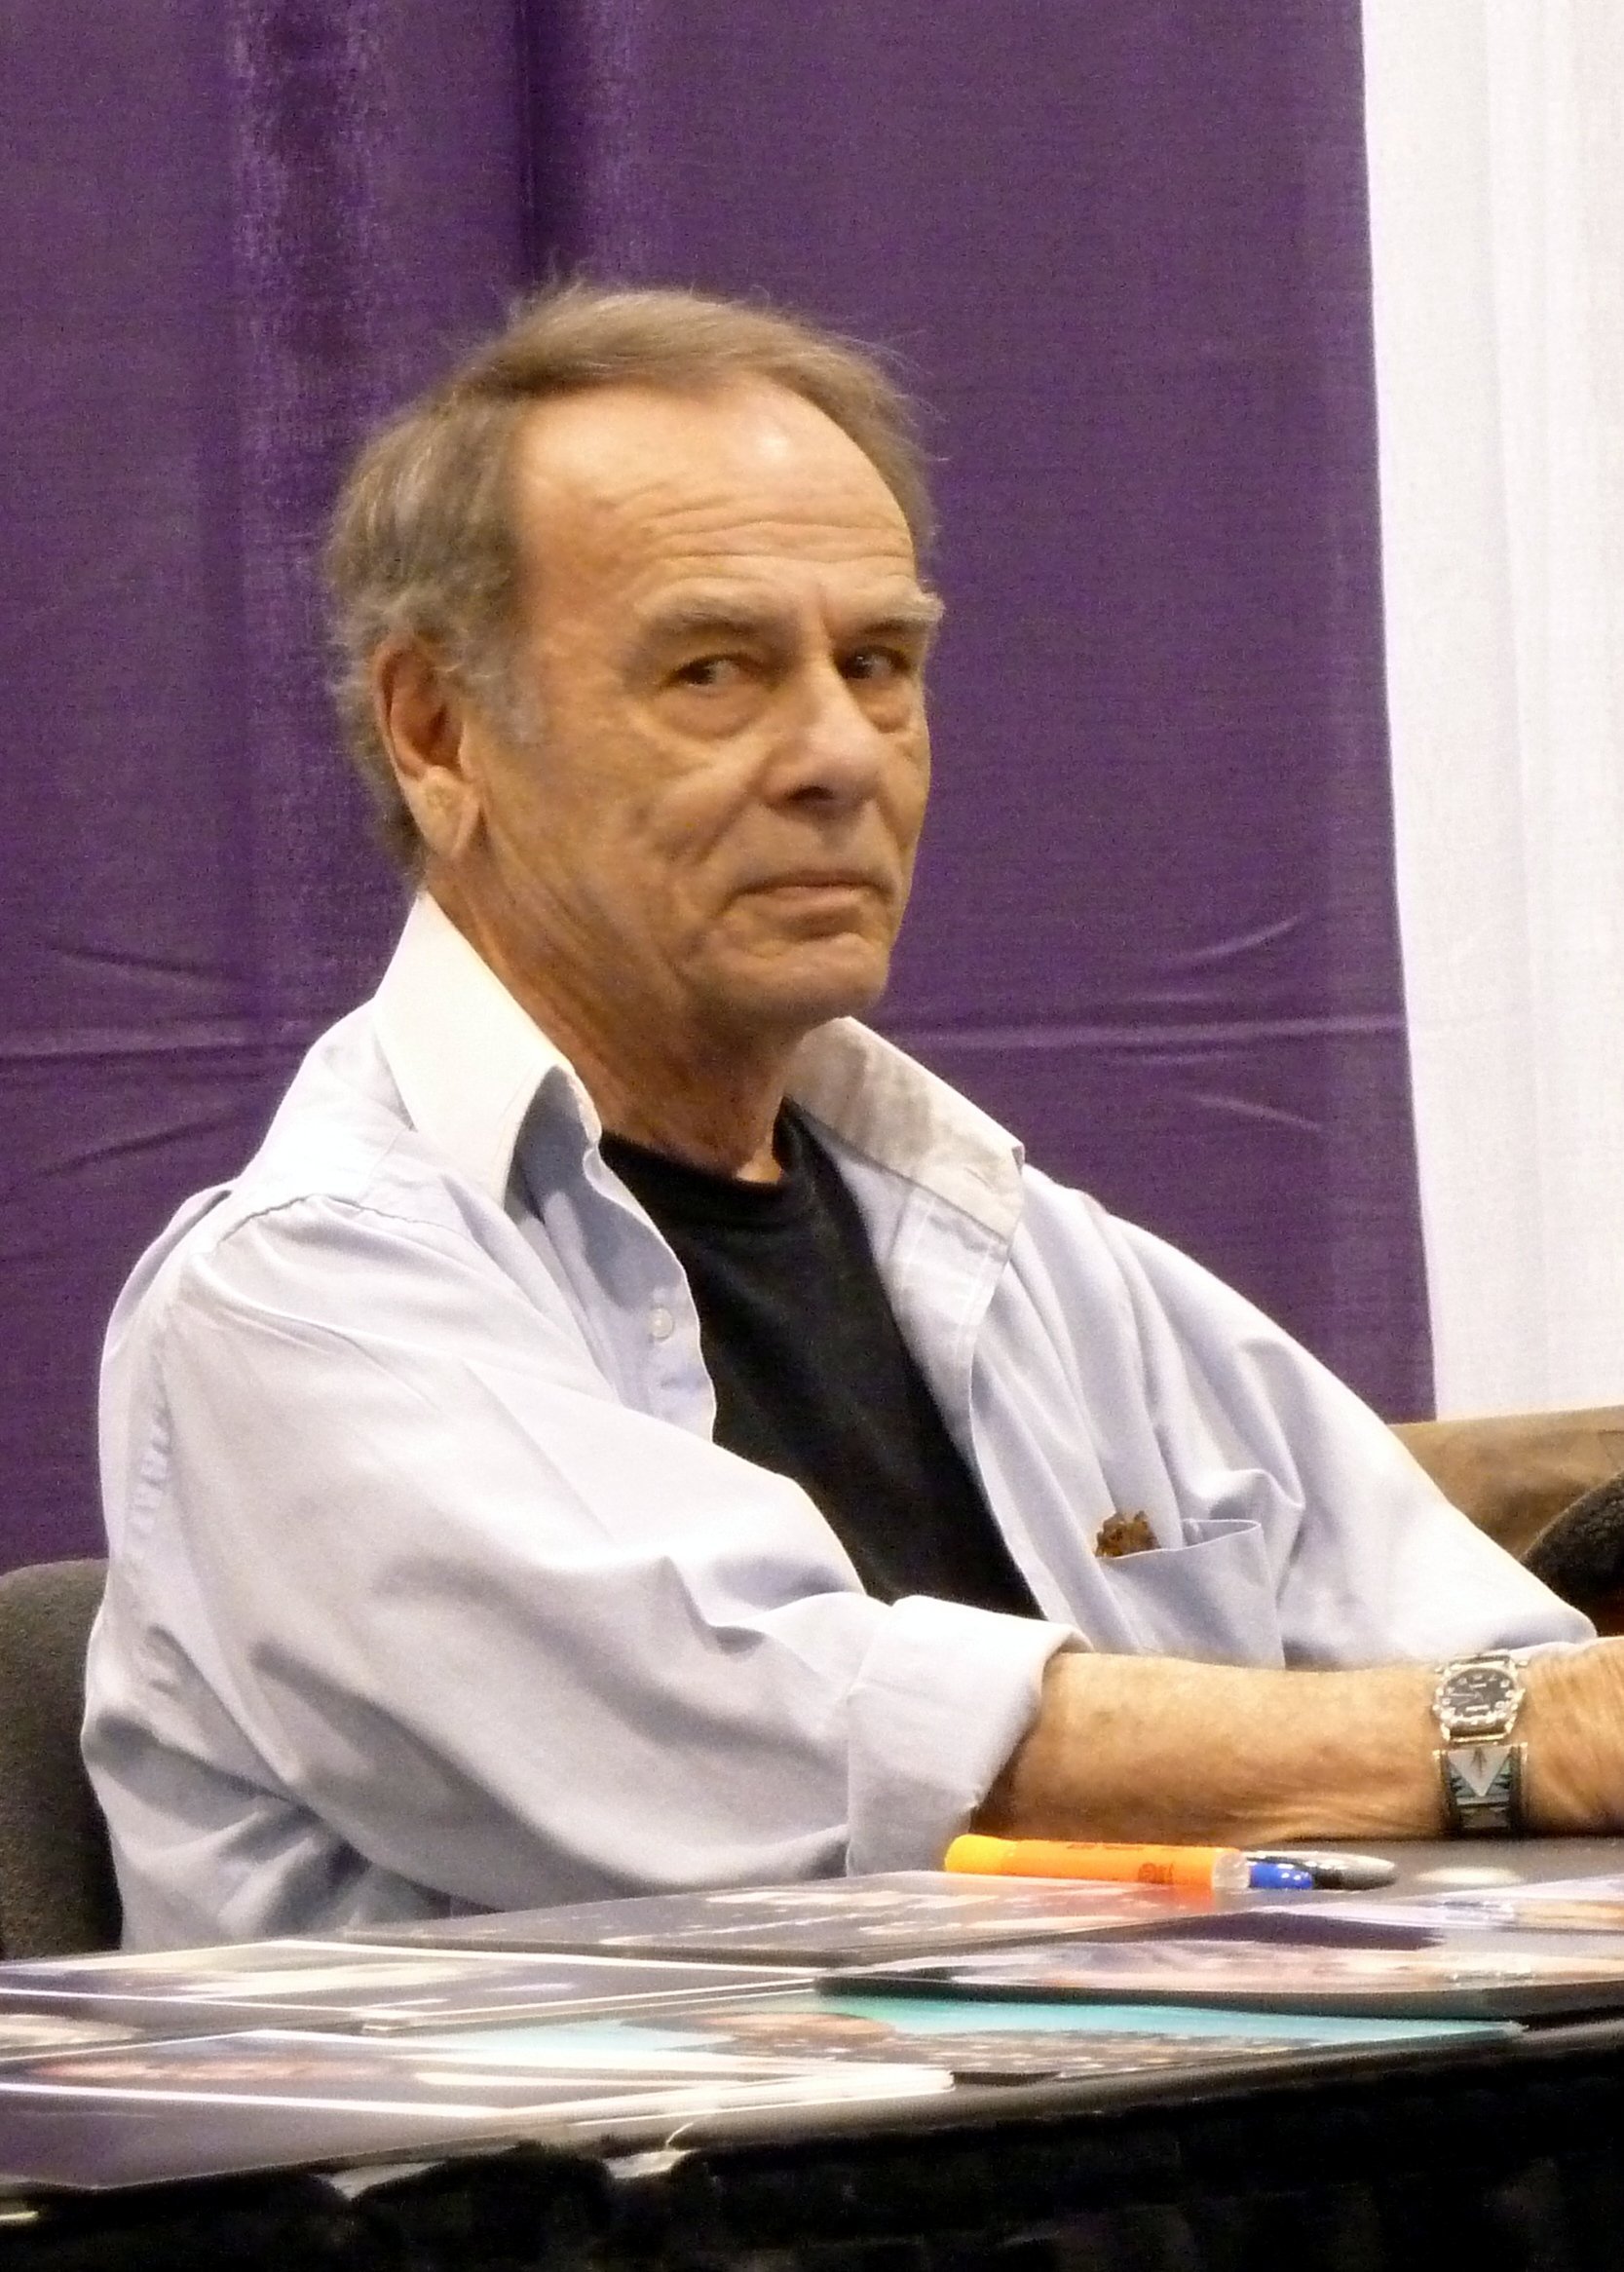 Dean Stockwell at Wizard World Toronto 2012. | Source: Wikipedia.